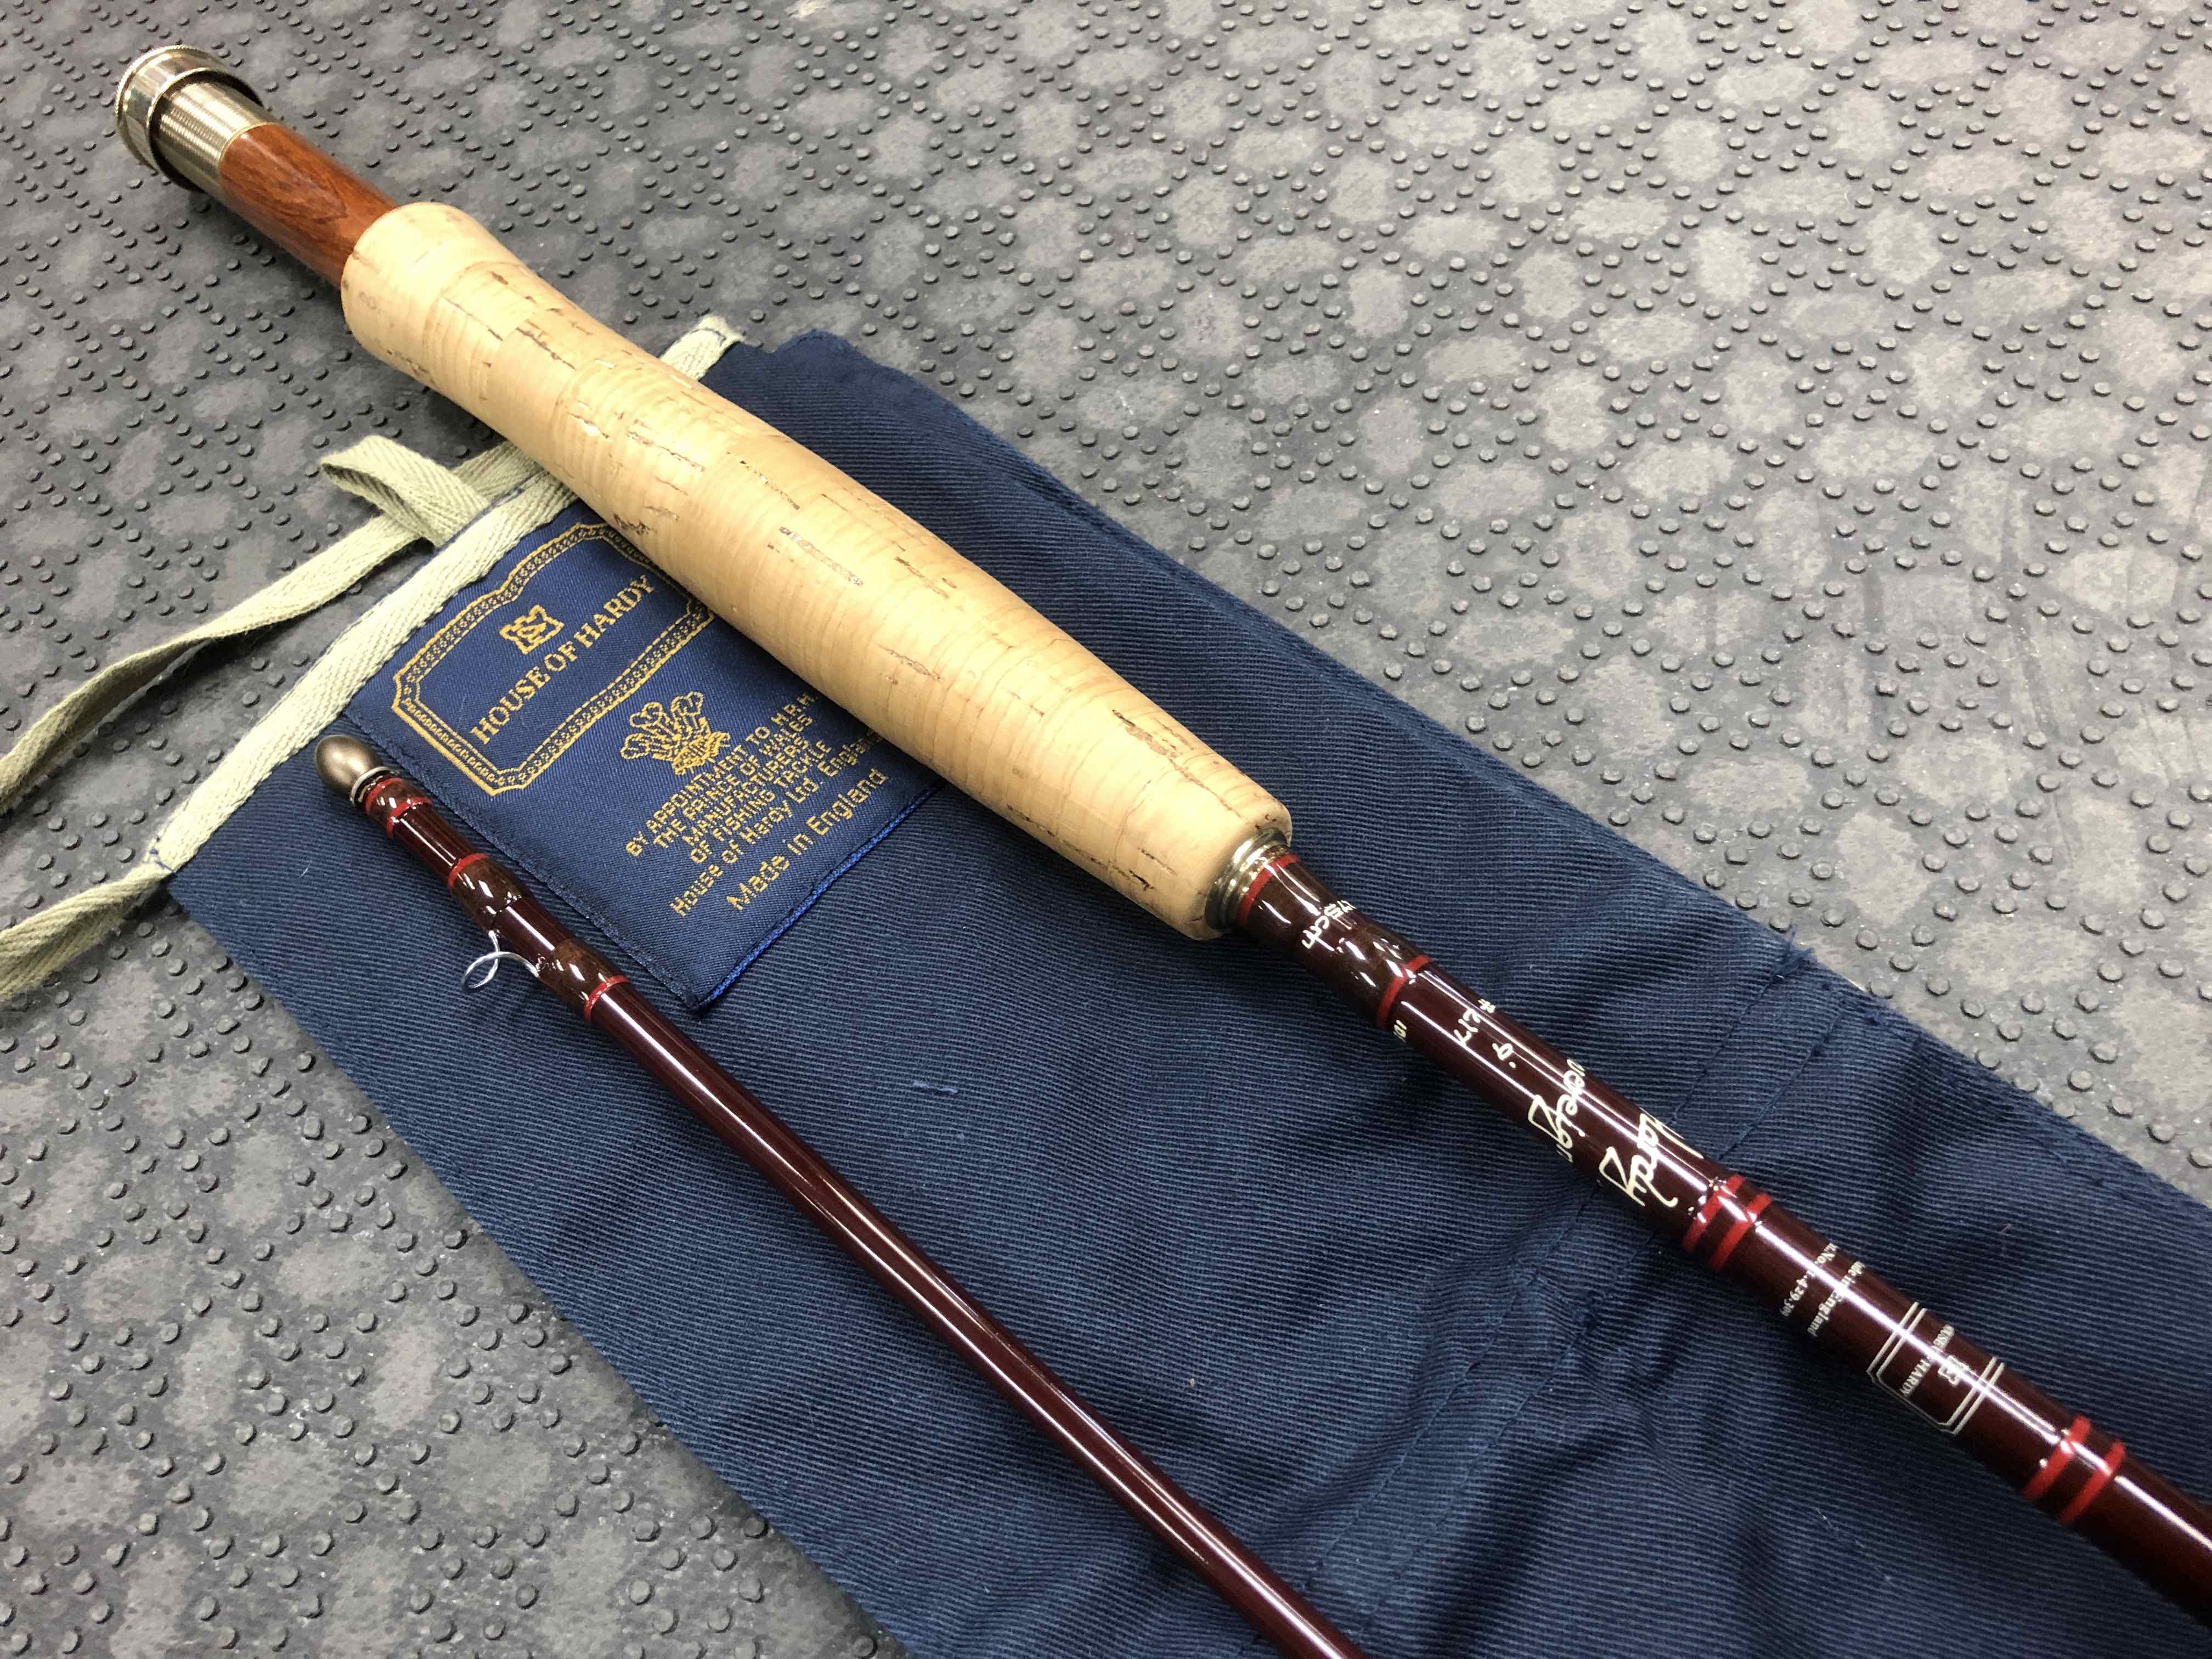 https://thefirstcast.ca/wp-content/uploads/2019/05/Hardy-Sovereign-2-piece-Graphite-Fly-Rod-67-Weight-cw-Cloth-Bag-AA.jpg